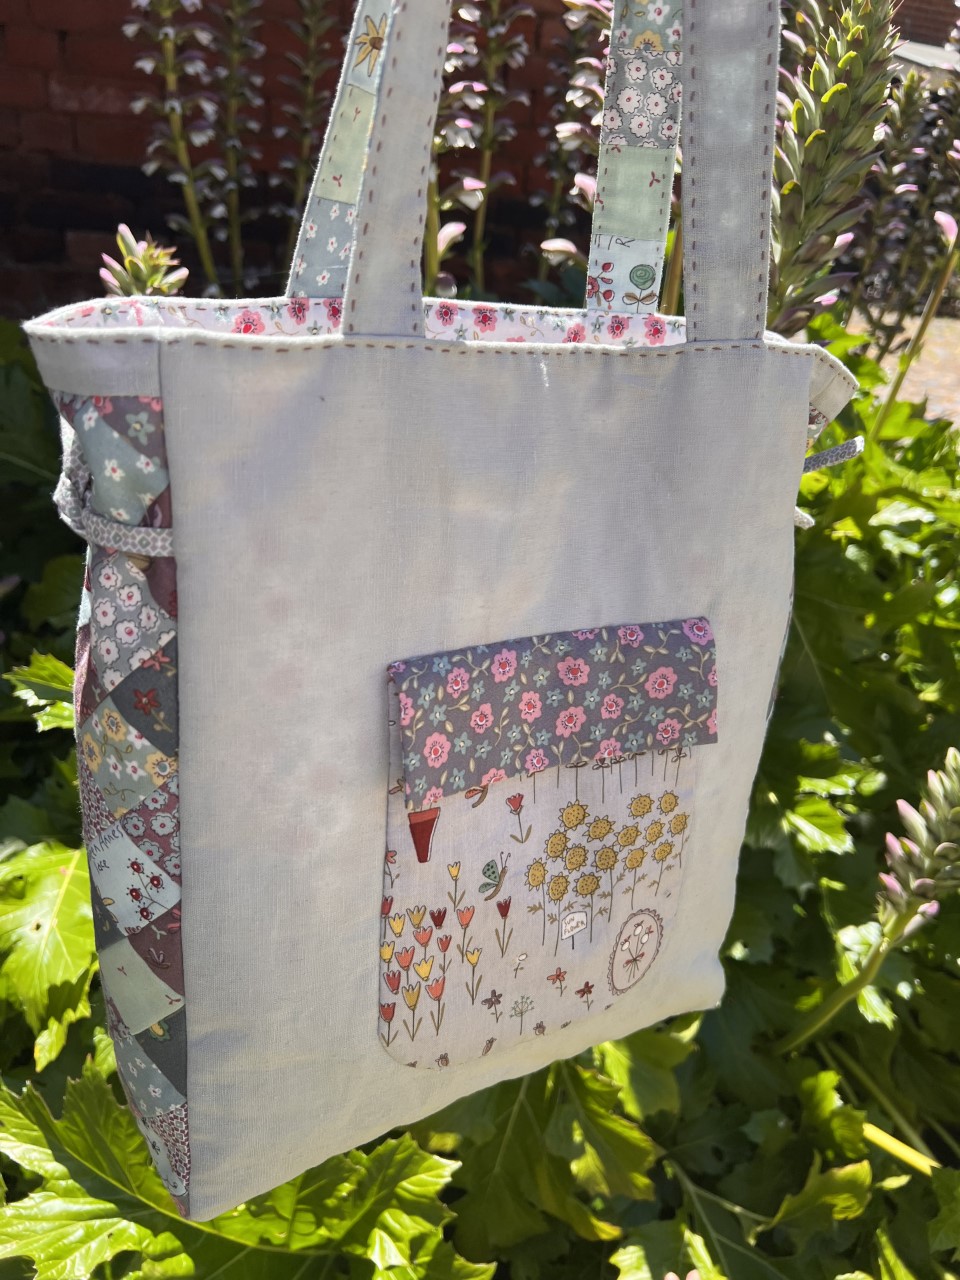 Signs of Spring Bag, Pattern by Anni Downs, Hatched and Patched